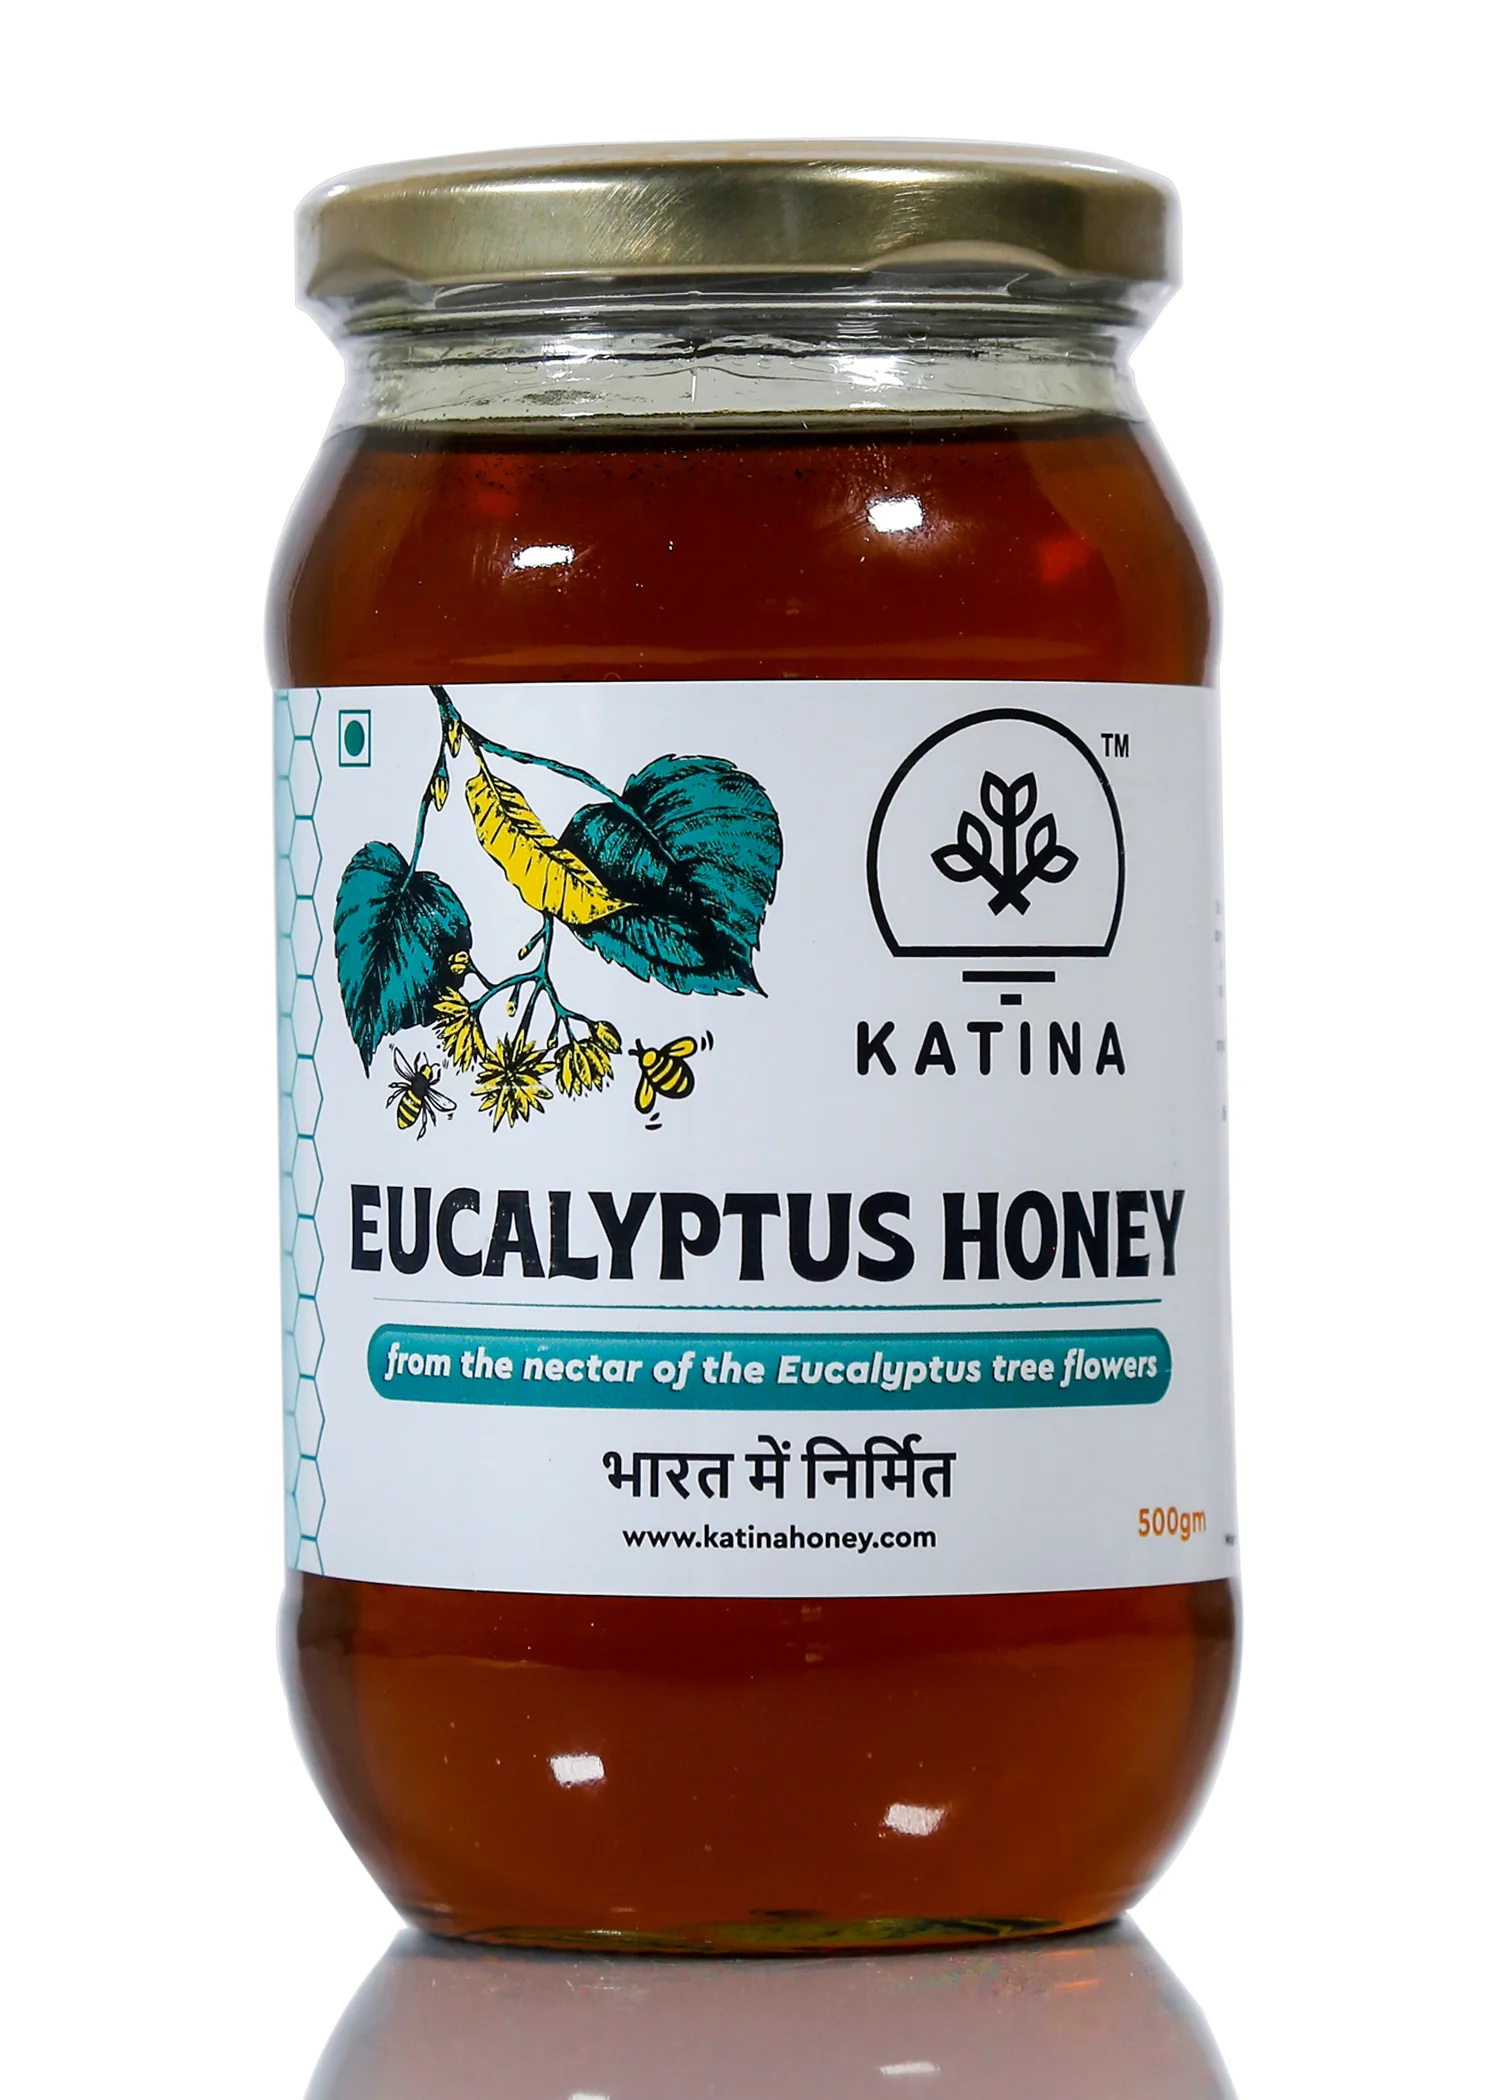 Order Multifloral Raw Honey online at free delivery - Raw Honey